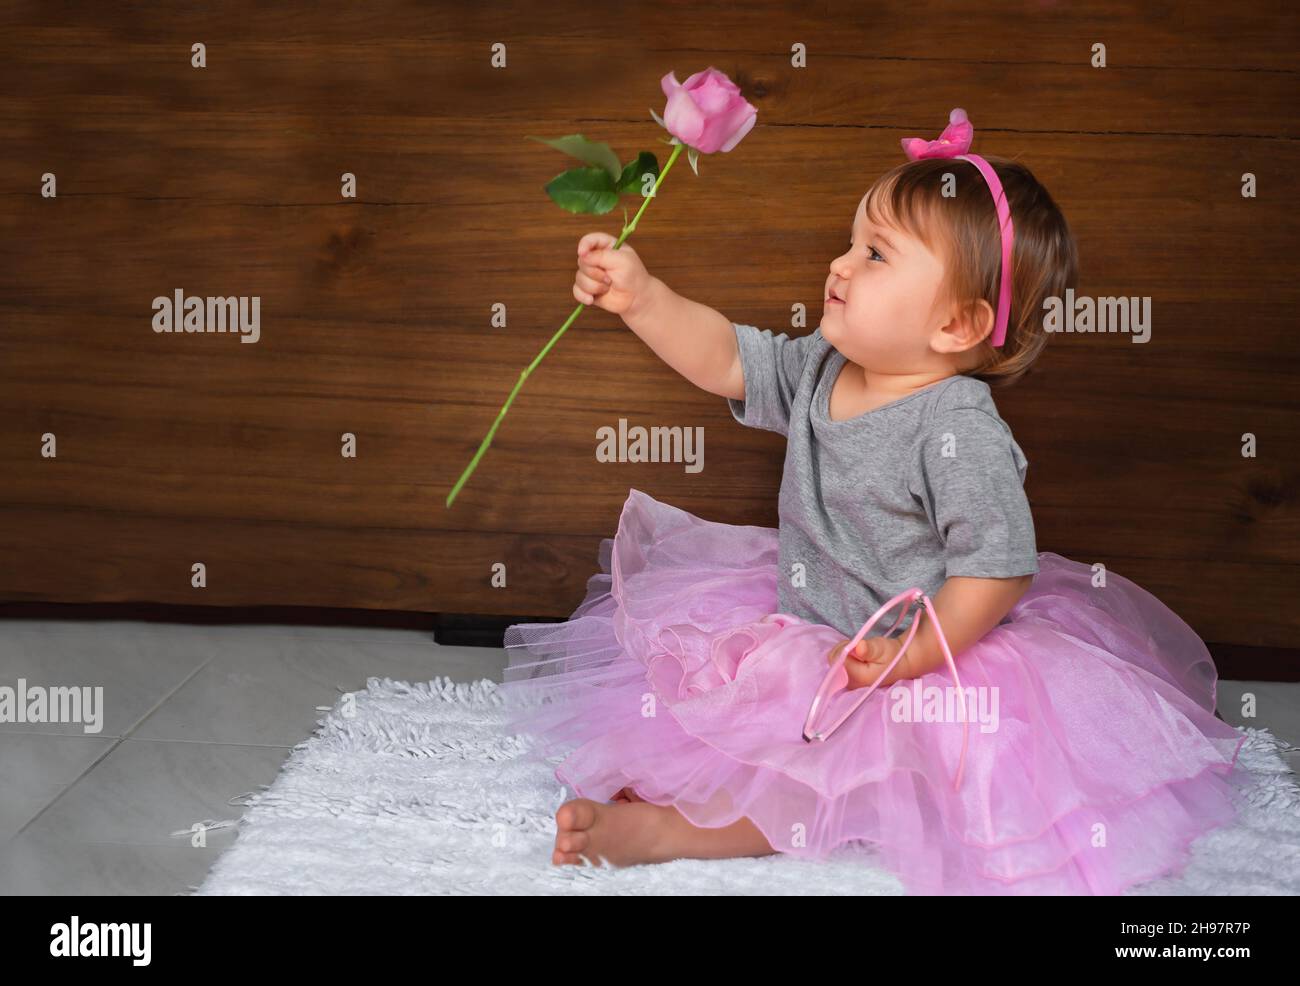 Cute baby with flower on a wooden background. Child on the floor in a pink dress, a girl looks at a pink rose Stock Photo